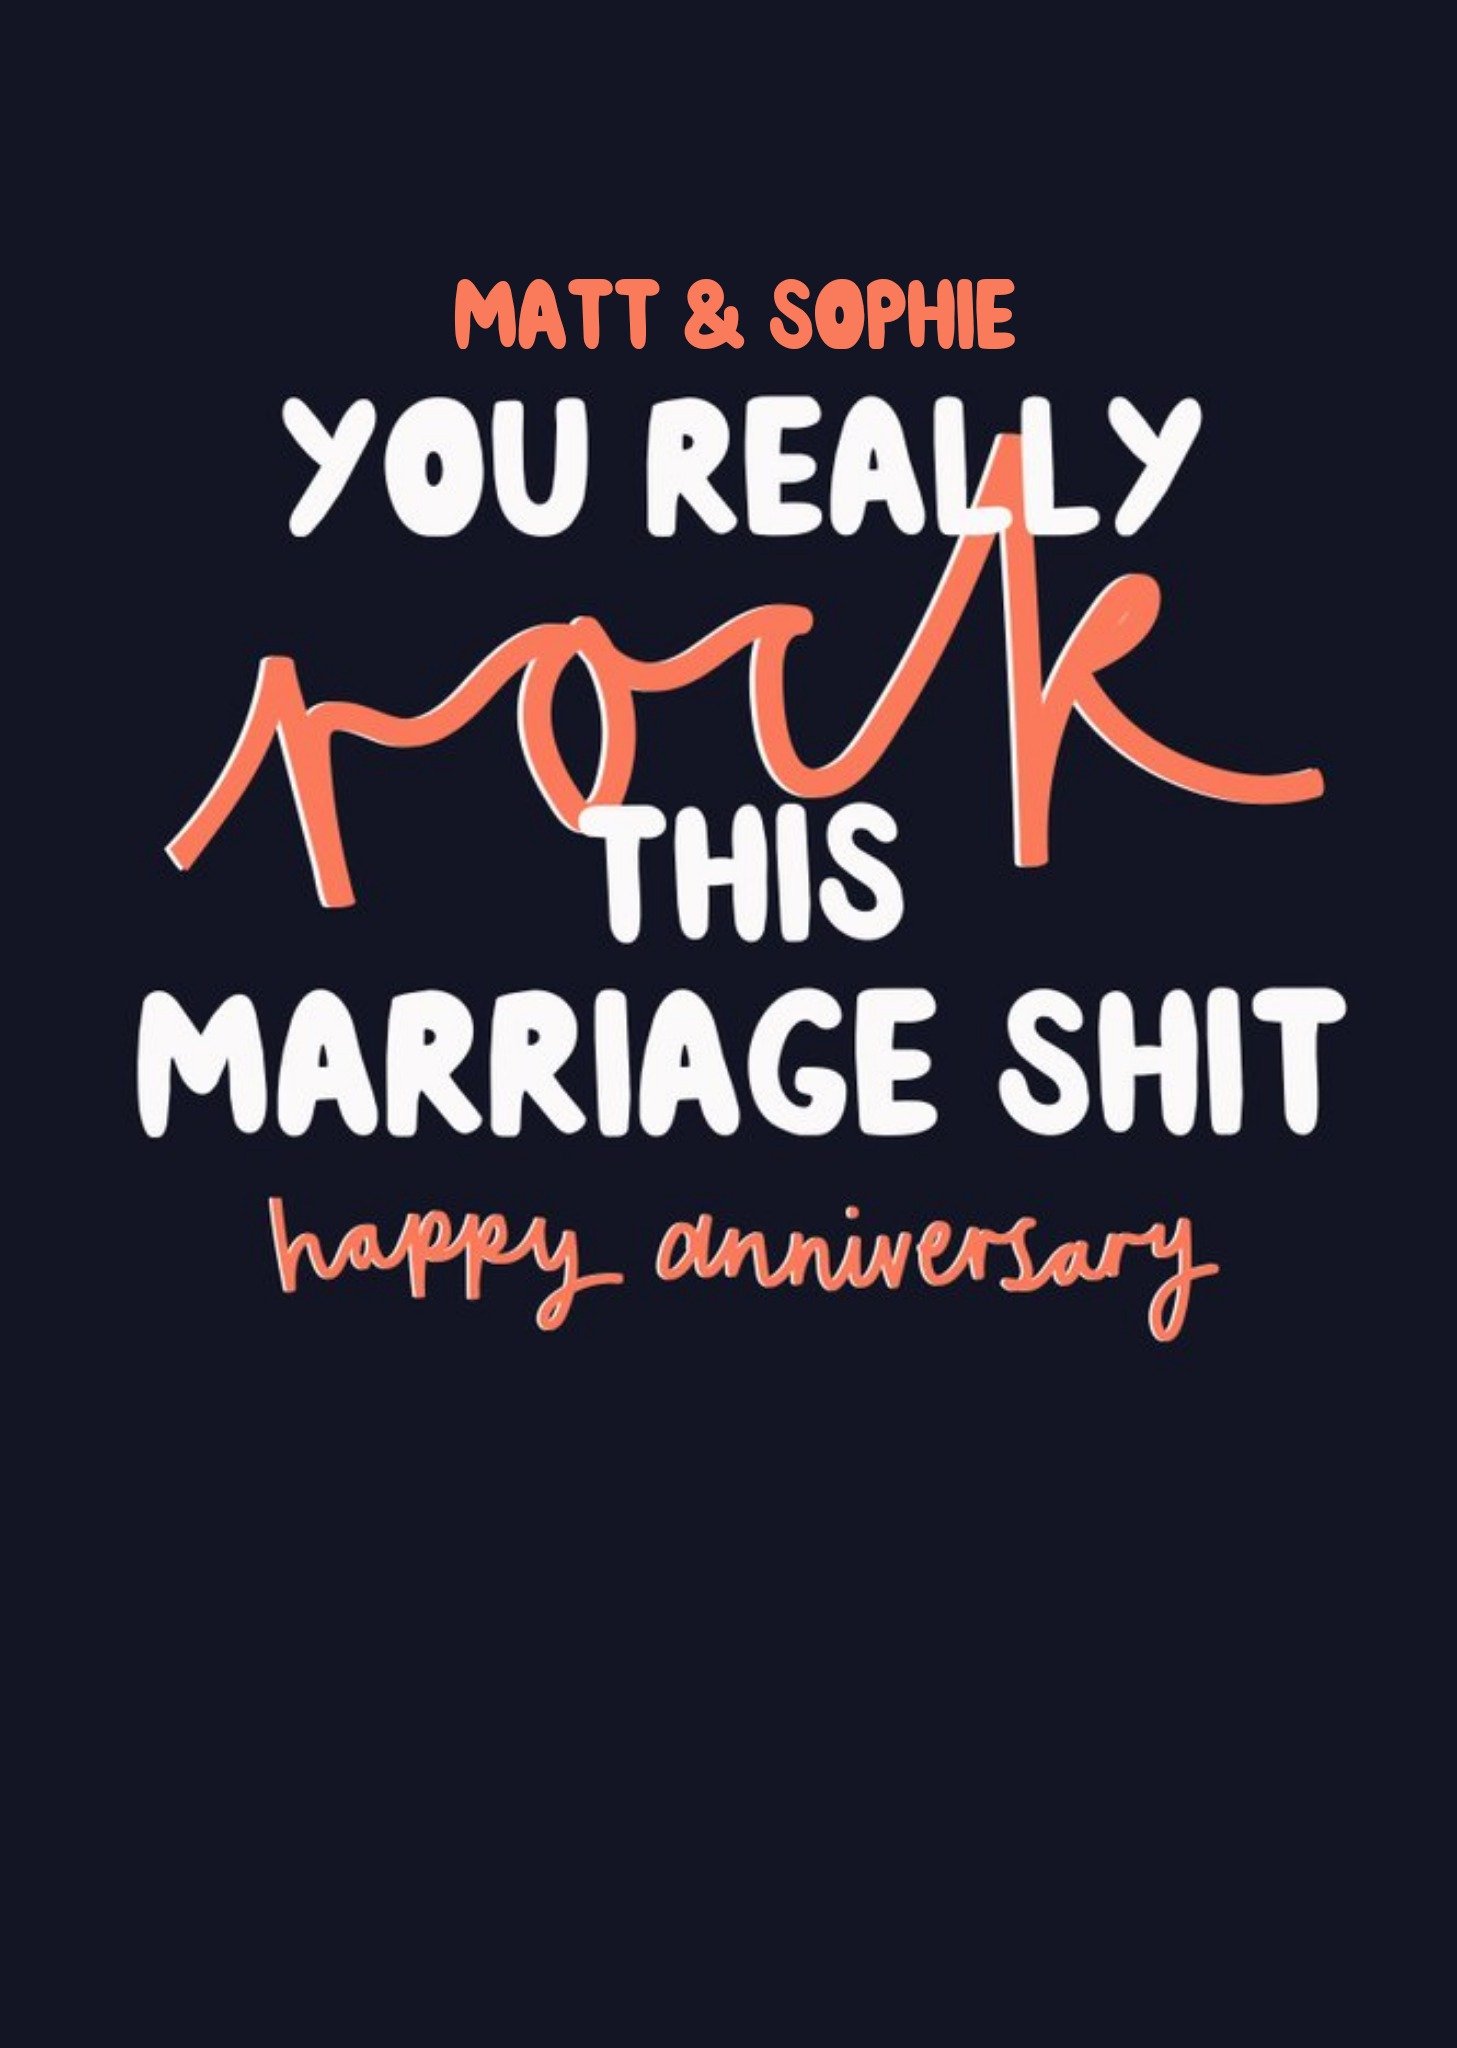 Moonpig You Really Rock This Marriage Shit Funny Anniversary Card Ecard